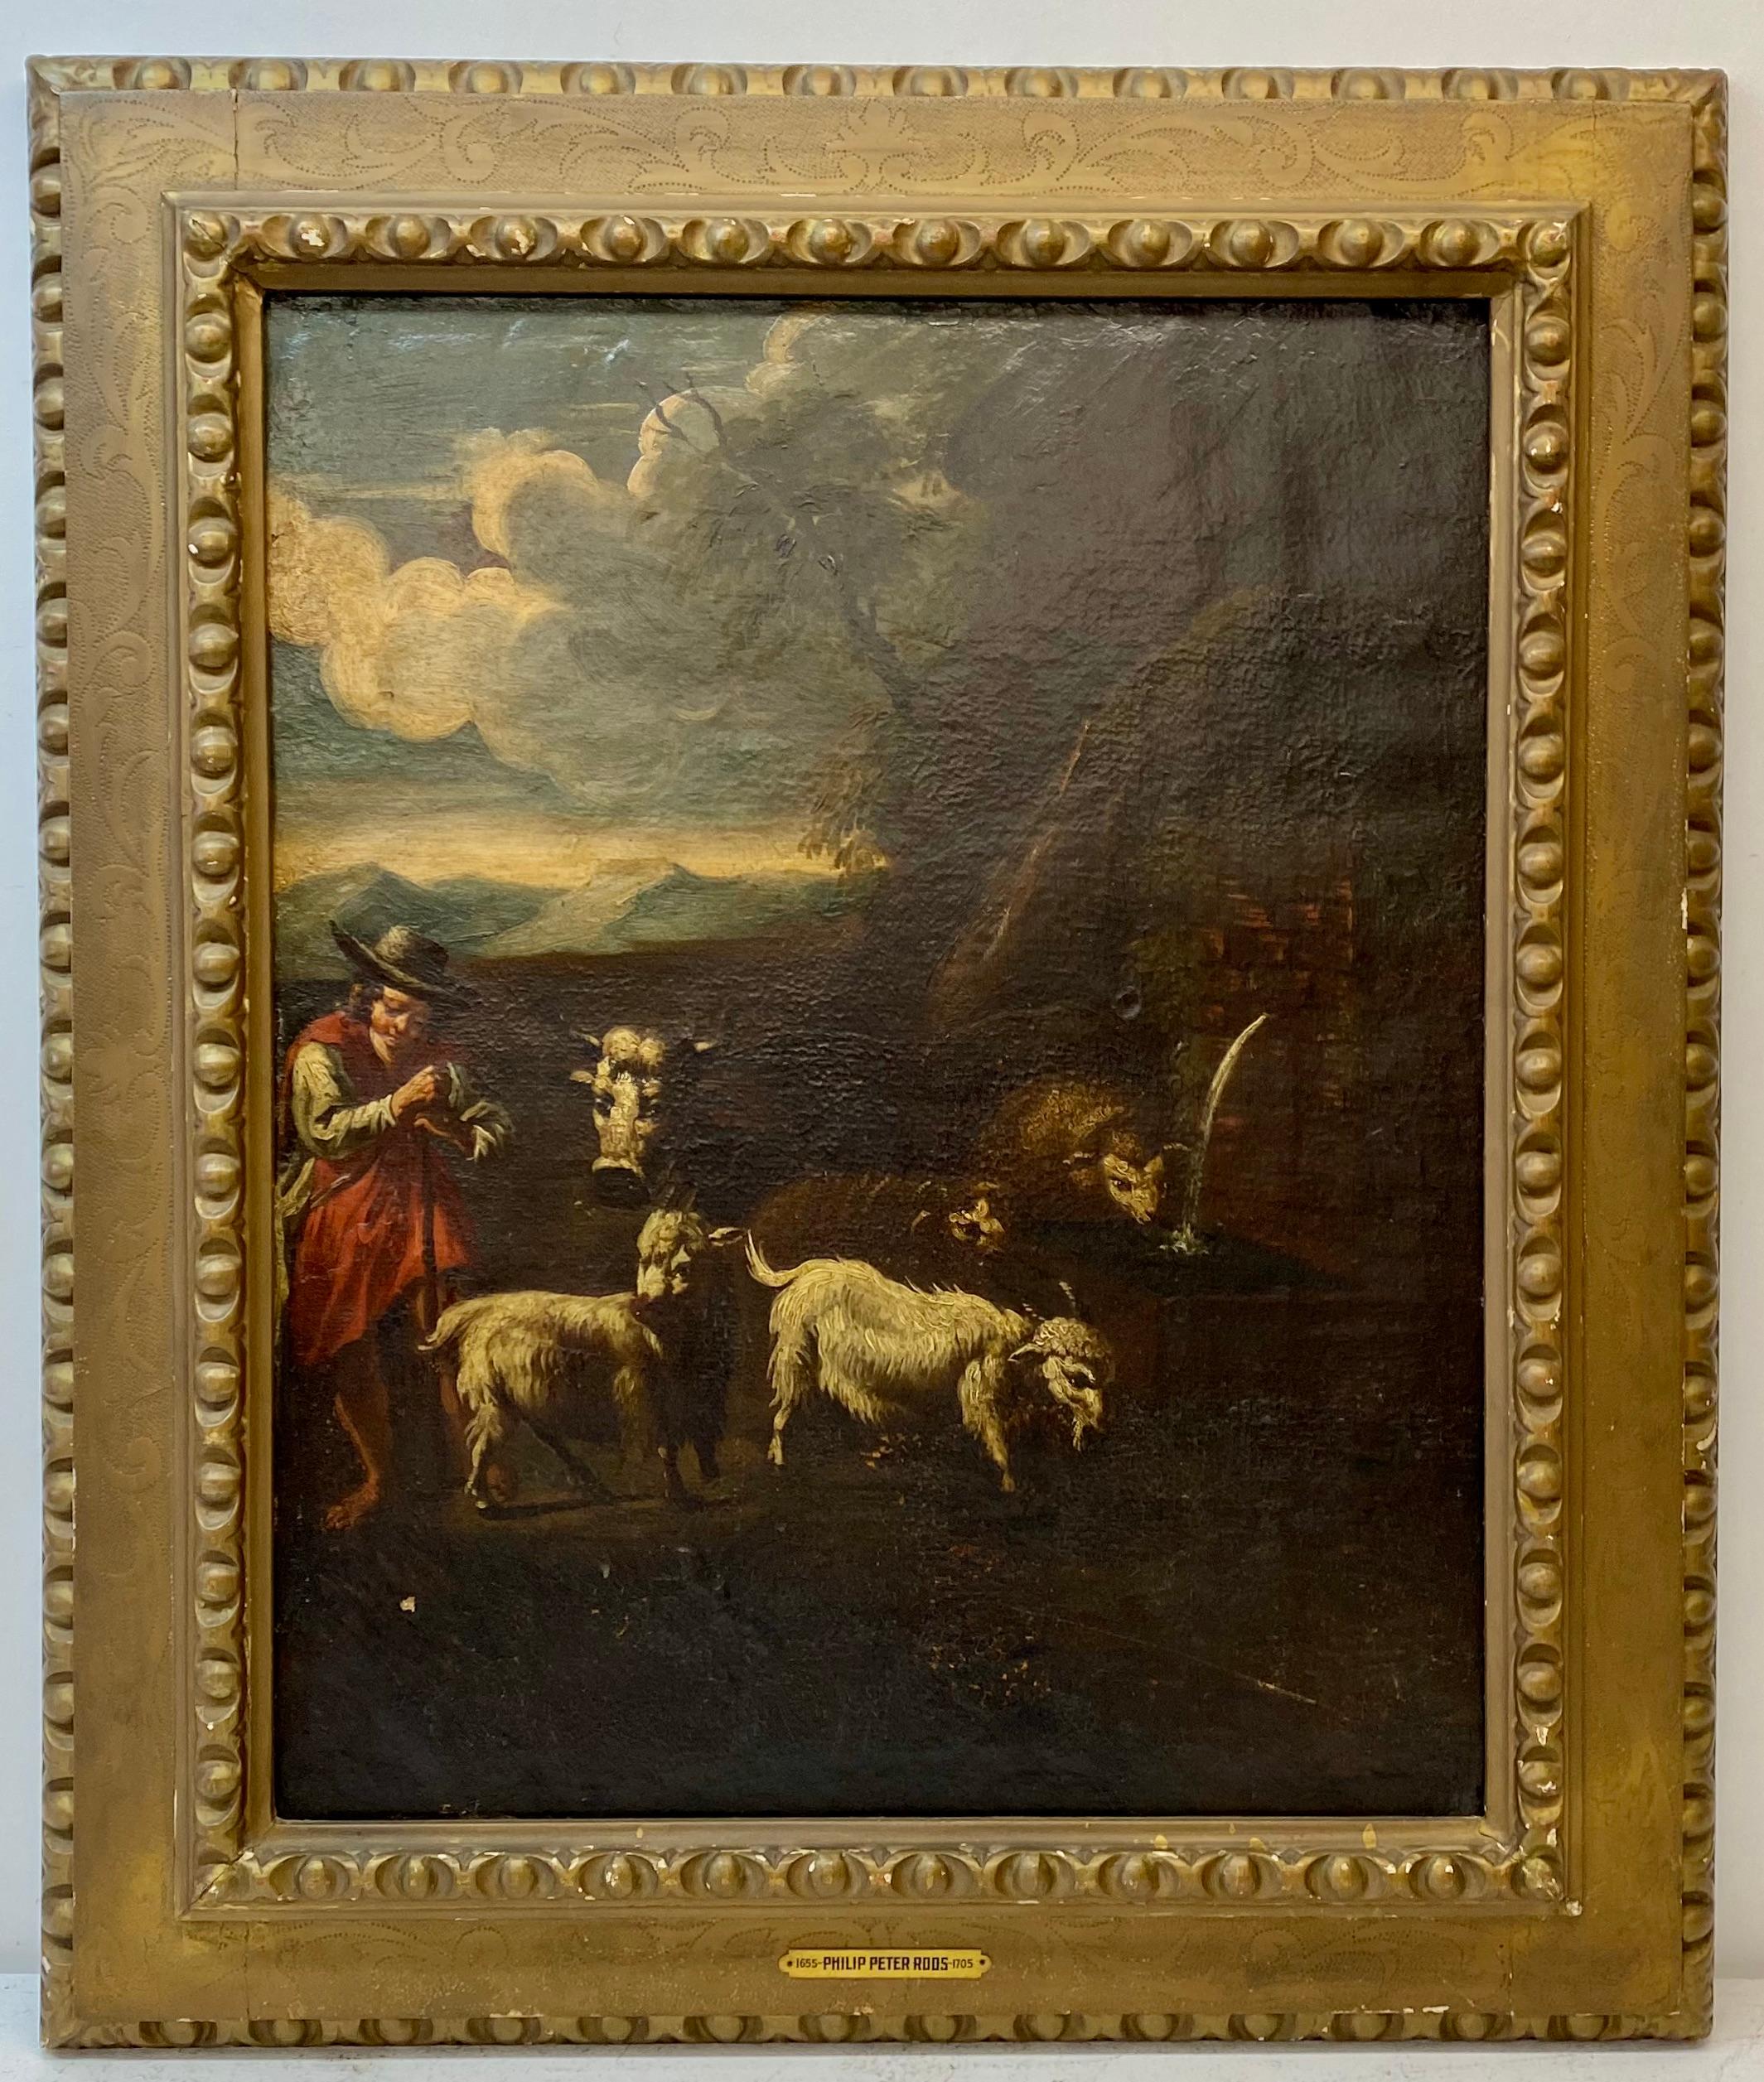 17th to 18th Century "The Shepherd" European Old Master Oil Painting